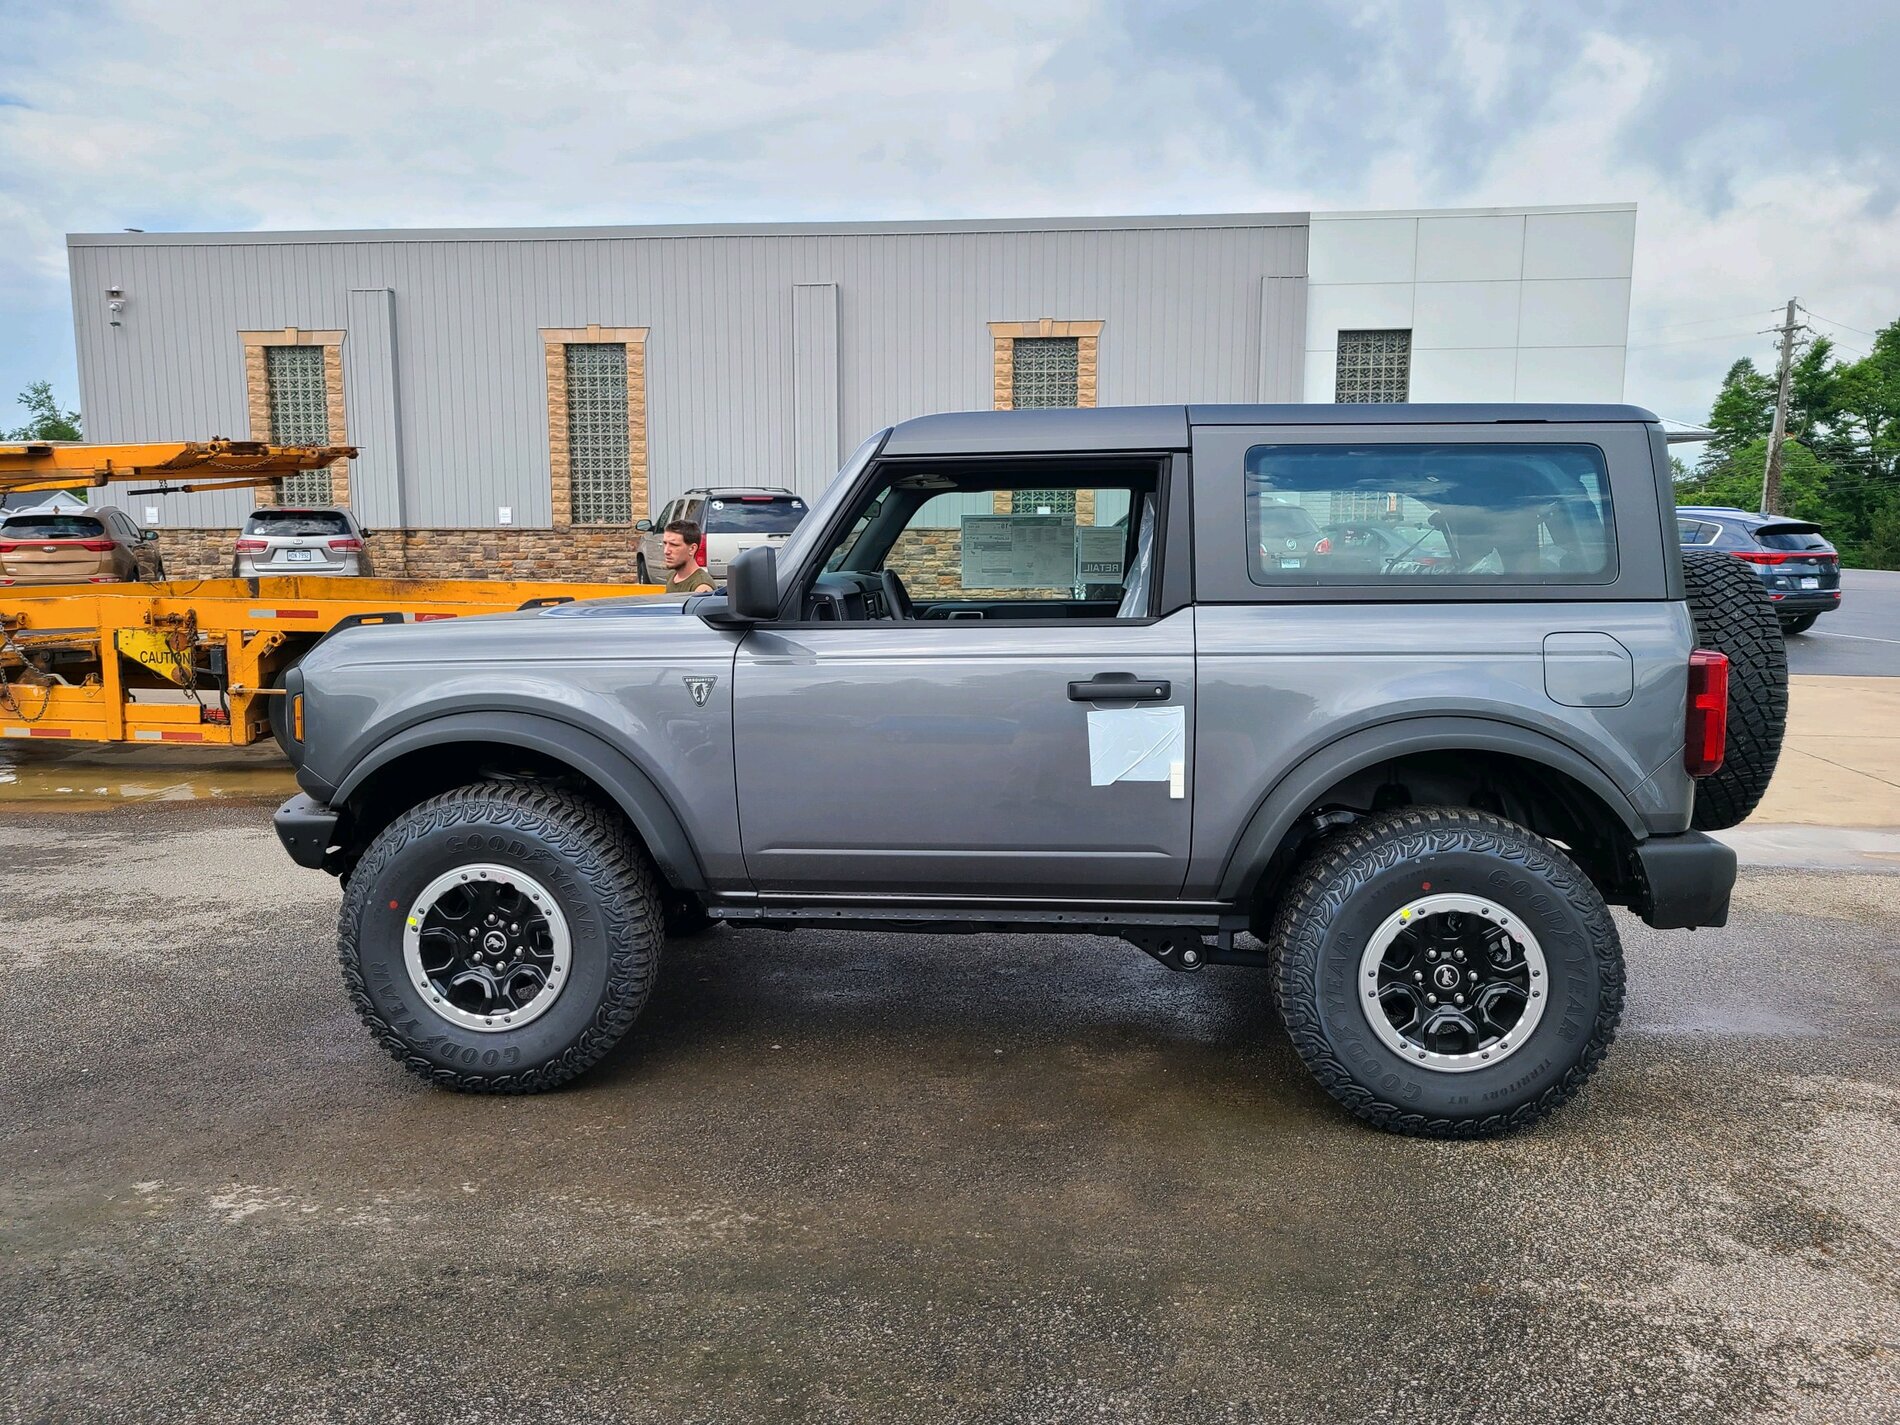 Ford Bronco BaseSquatch DELIVERED : 2 Door Base Sasquatch [UPDATE - NOW WITH MORE PICTURES & REVIEW] 46201915-D156-434E-93F0-B28A4CAF0FCC